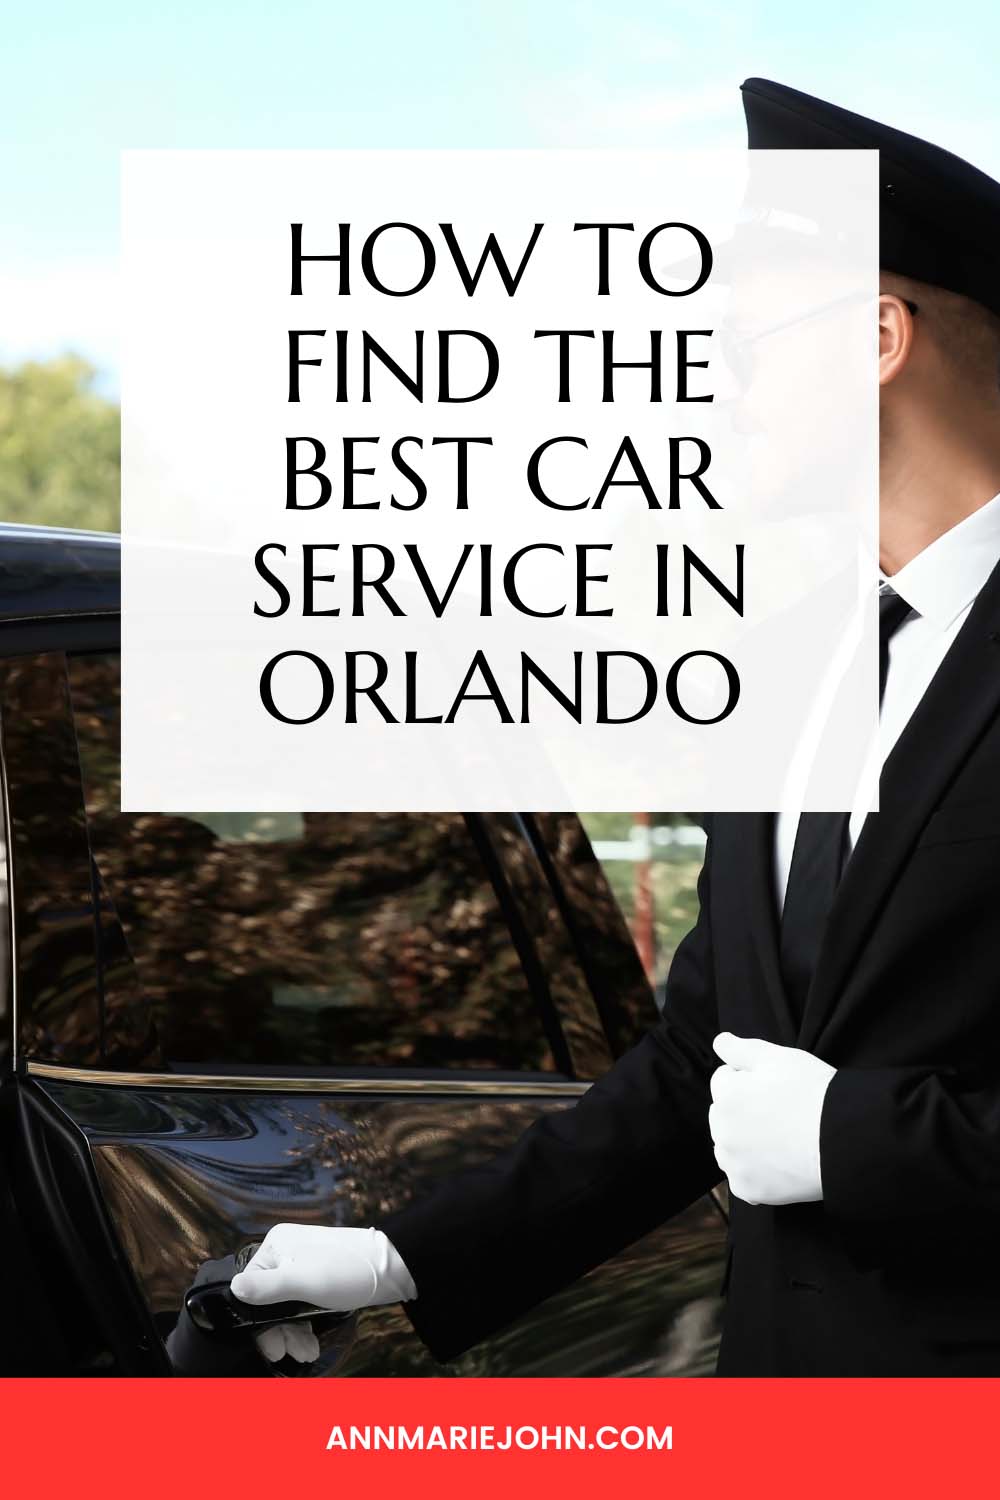 How to Find the Best Car Service in Orlando